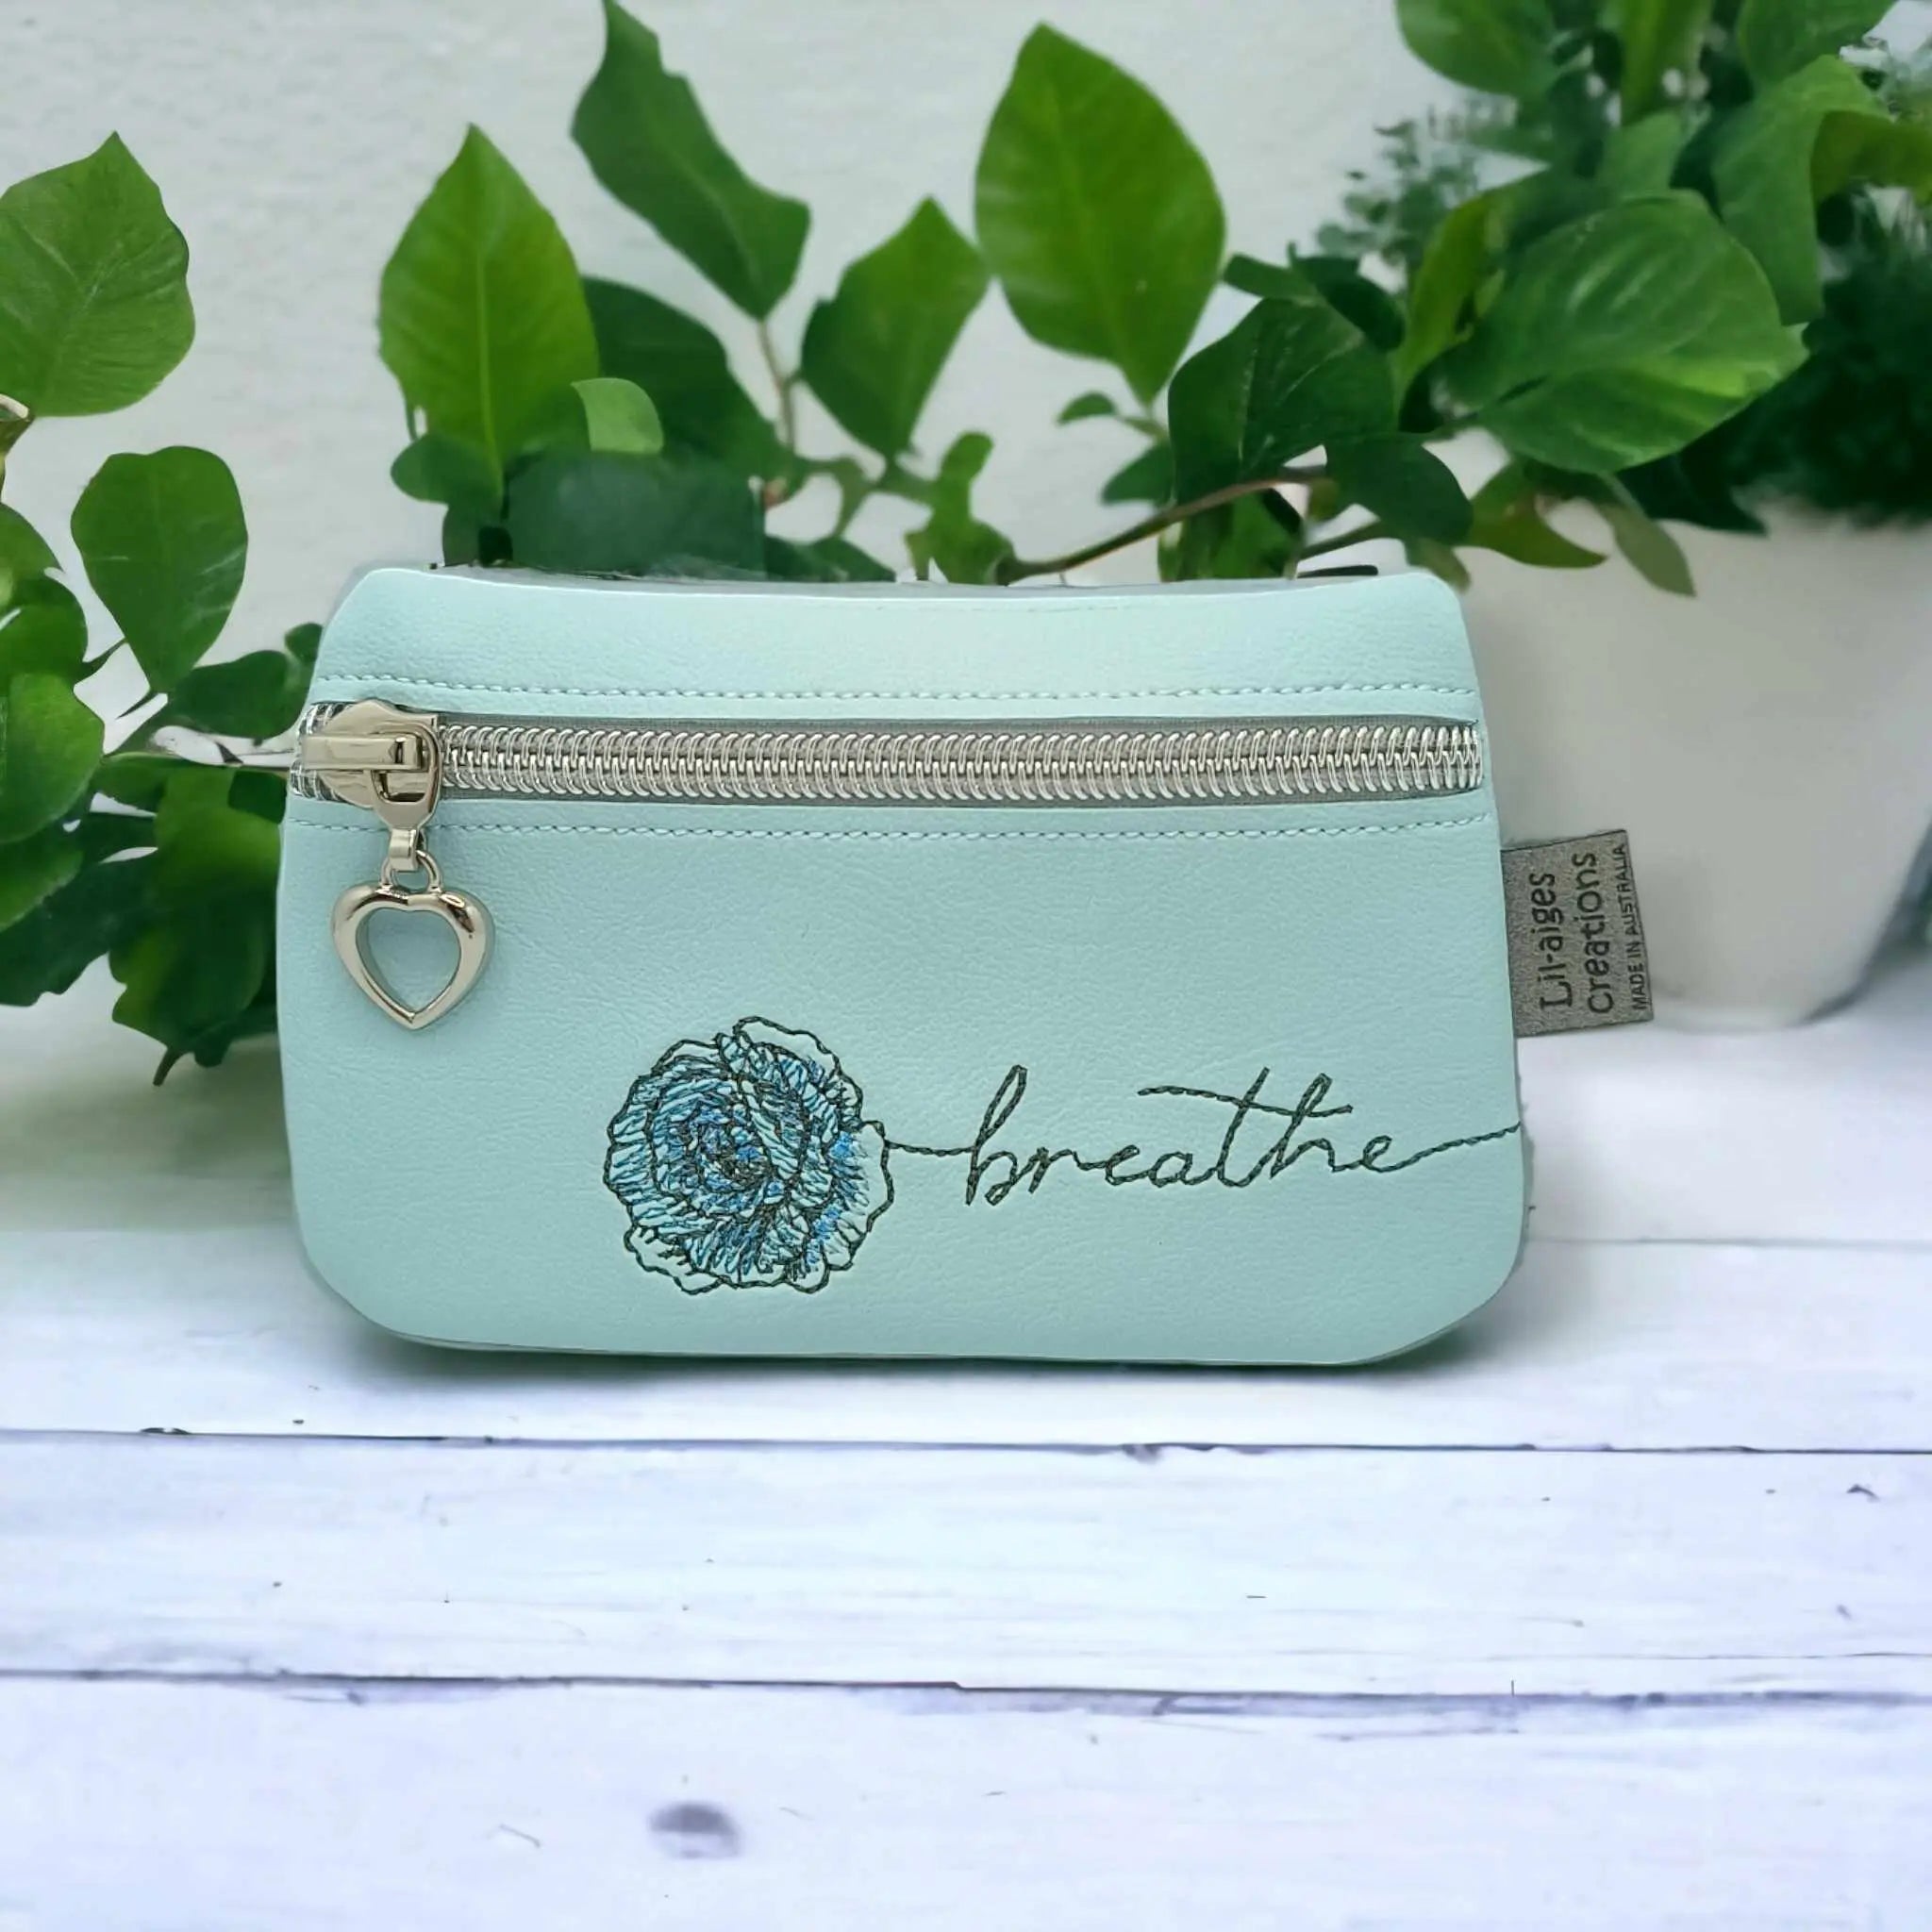 Copy of Fearless in Style: Light Blue Zipper Coin Purse with Lily Design - Image #1